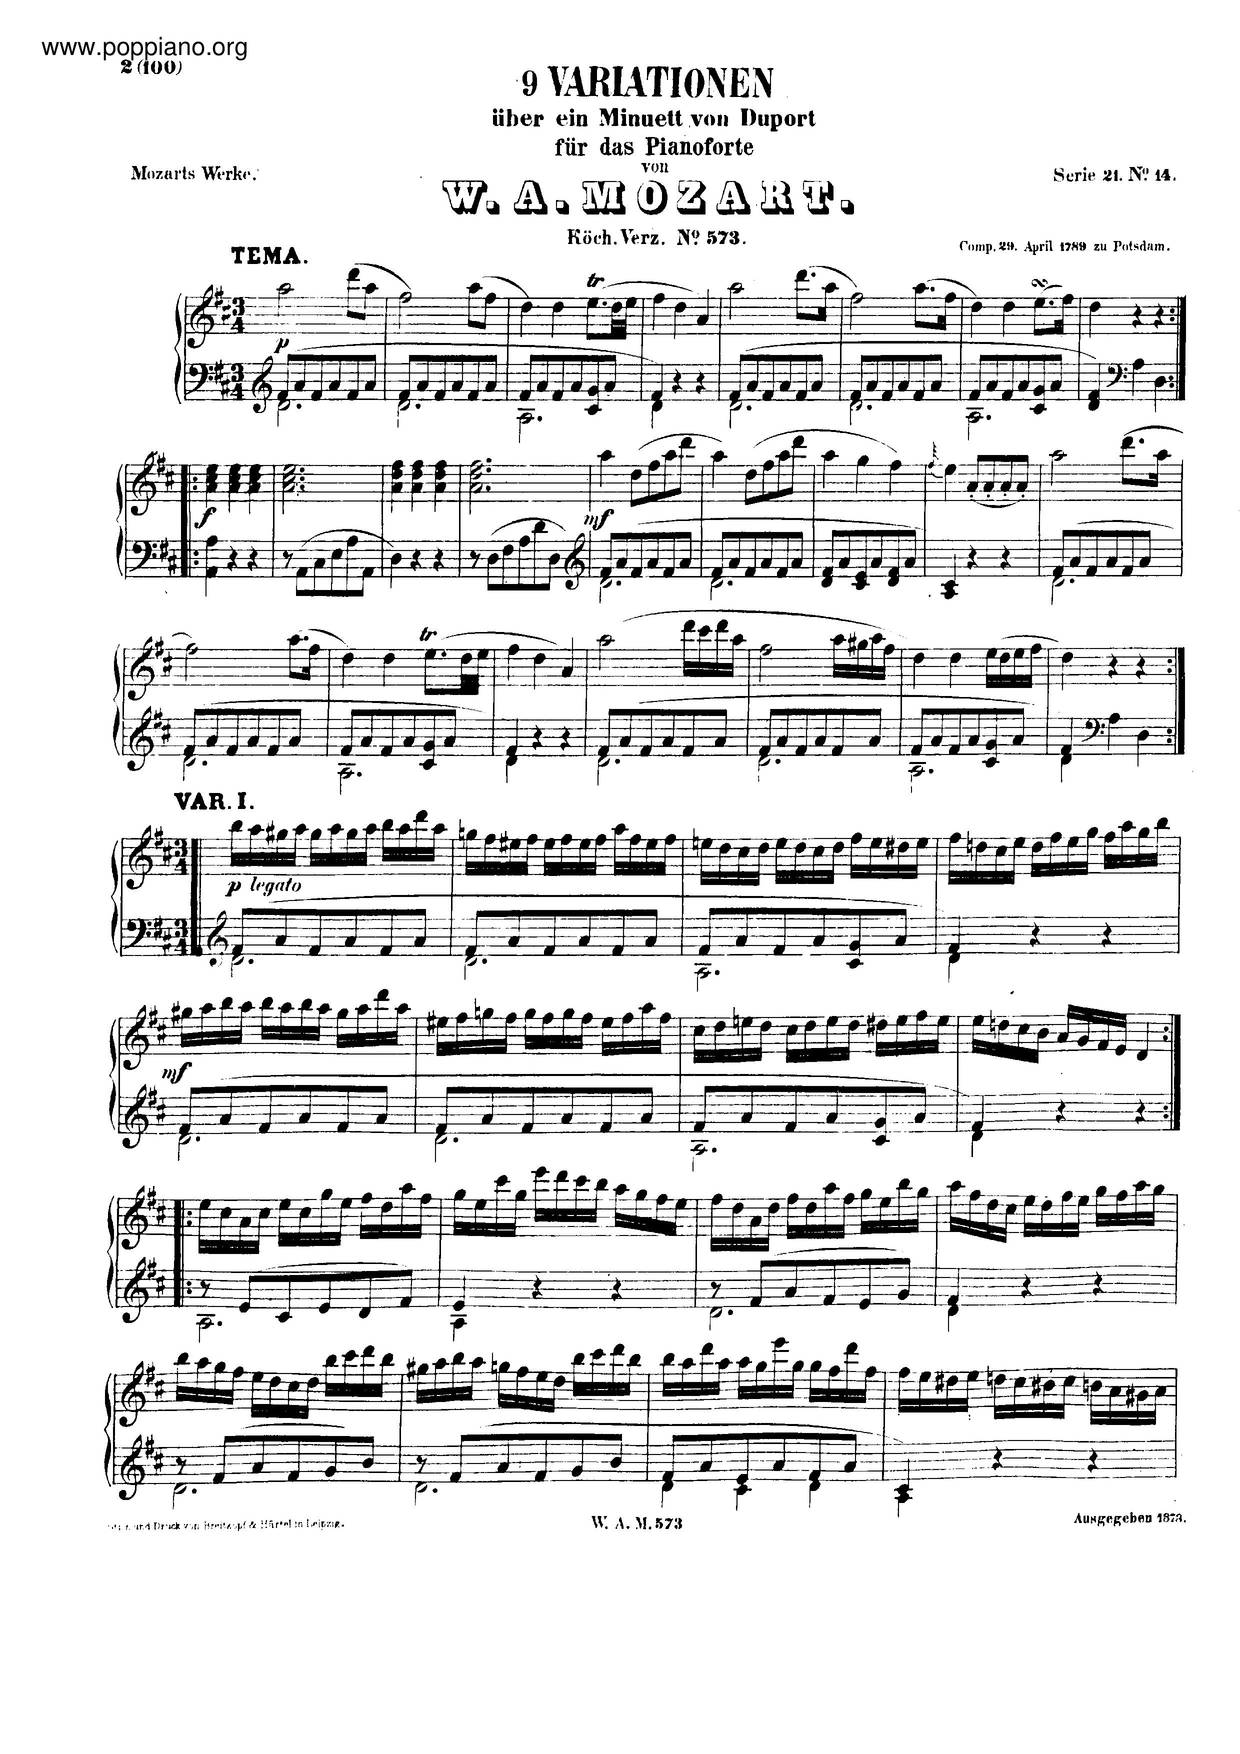 9 Variations On A Minuet By Duport, K. 573 Score